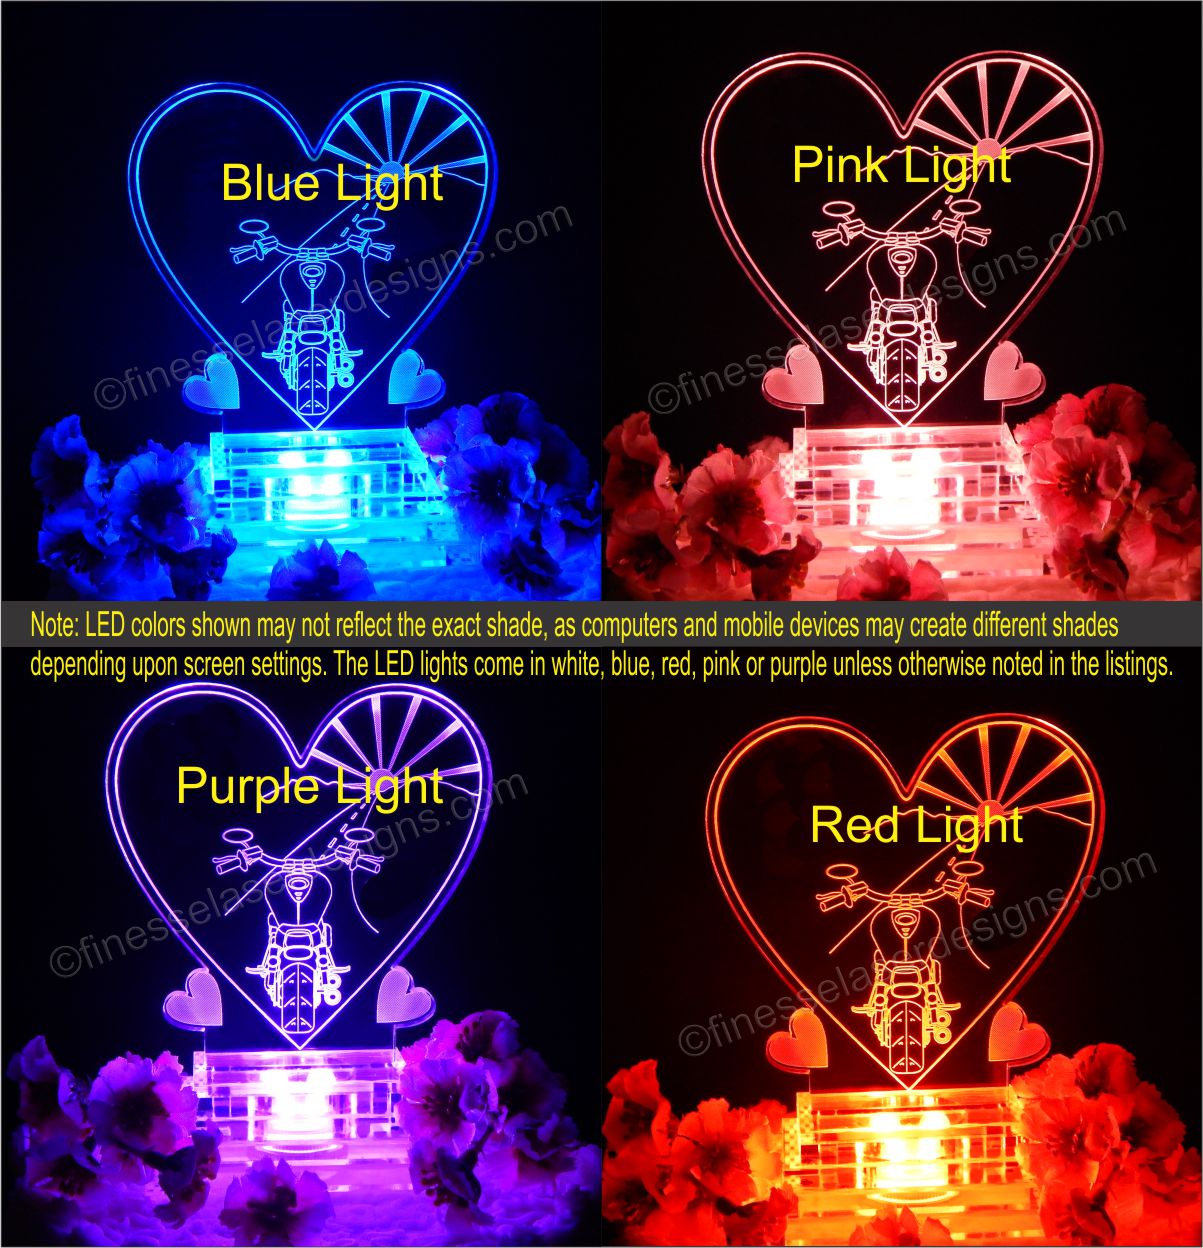 Colored light views of acrylic heart shaped cake topper showing backside view of motorcycle driving towards a sunset, with blue, pink, purple and red light views